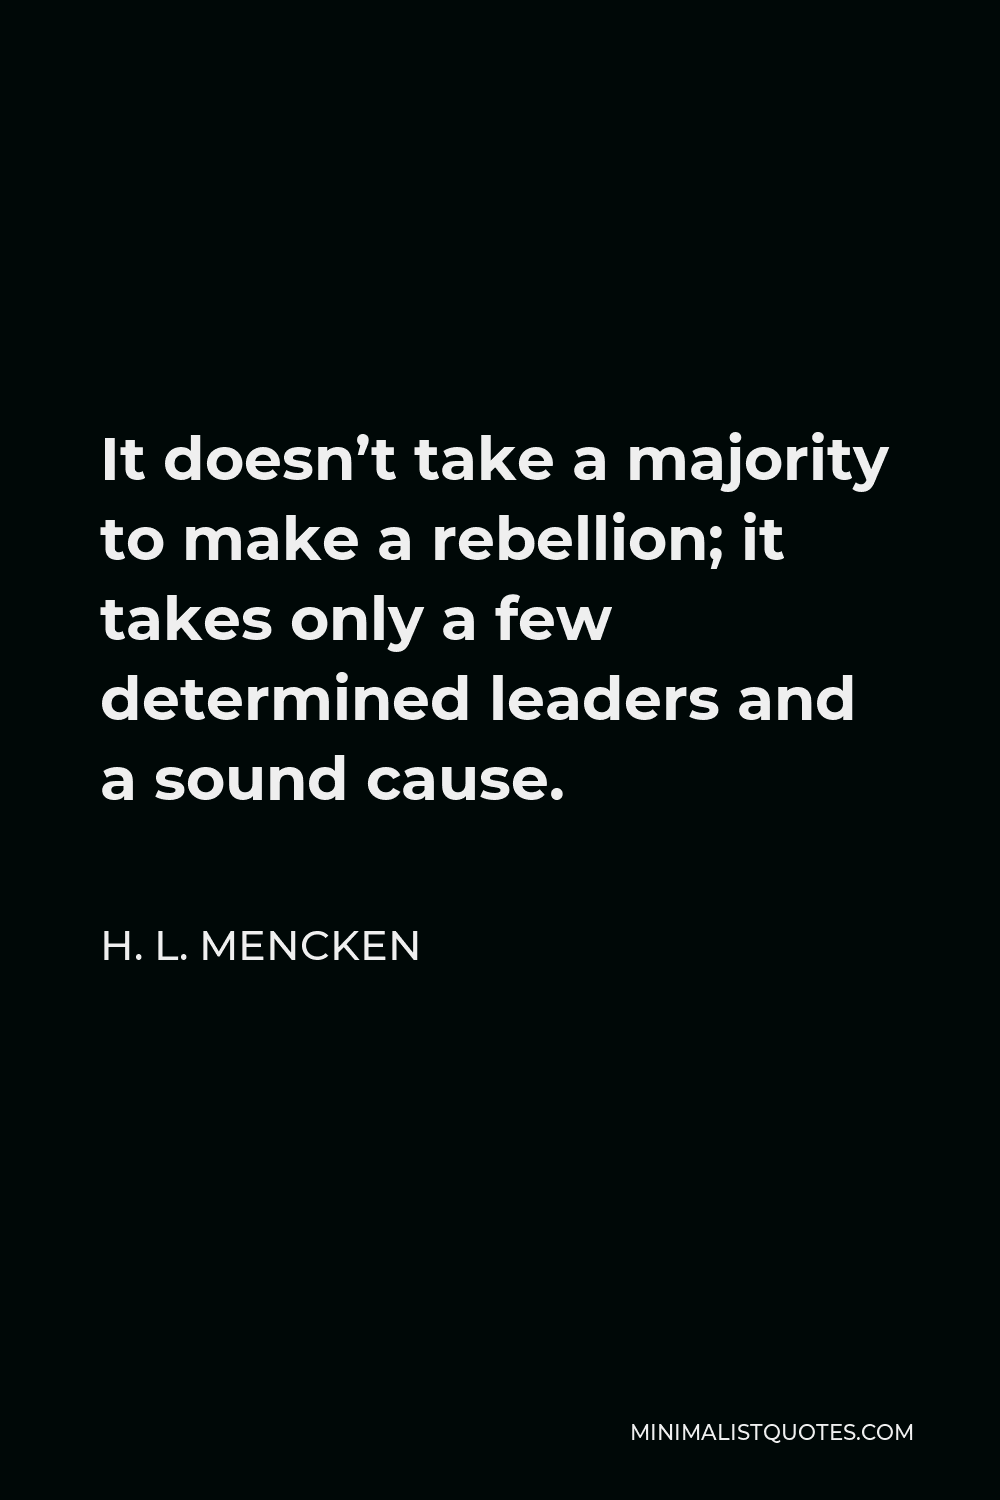 H. L. Mencken Quote - It doesn’t take a majority to make a rebellion; it takes only a few determined leaders and a sound cause.